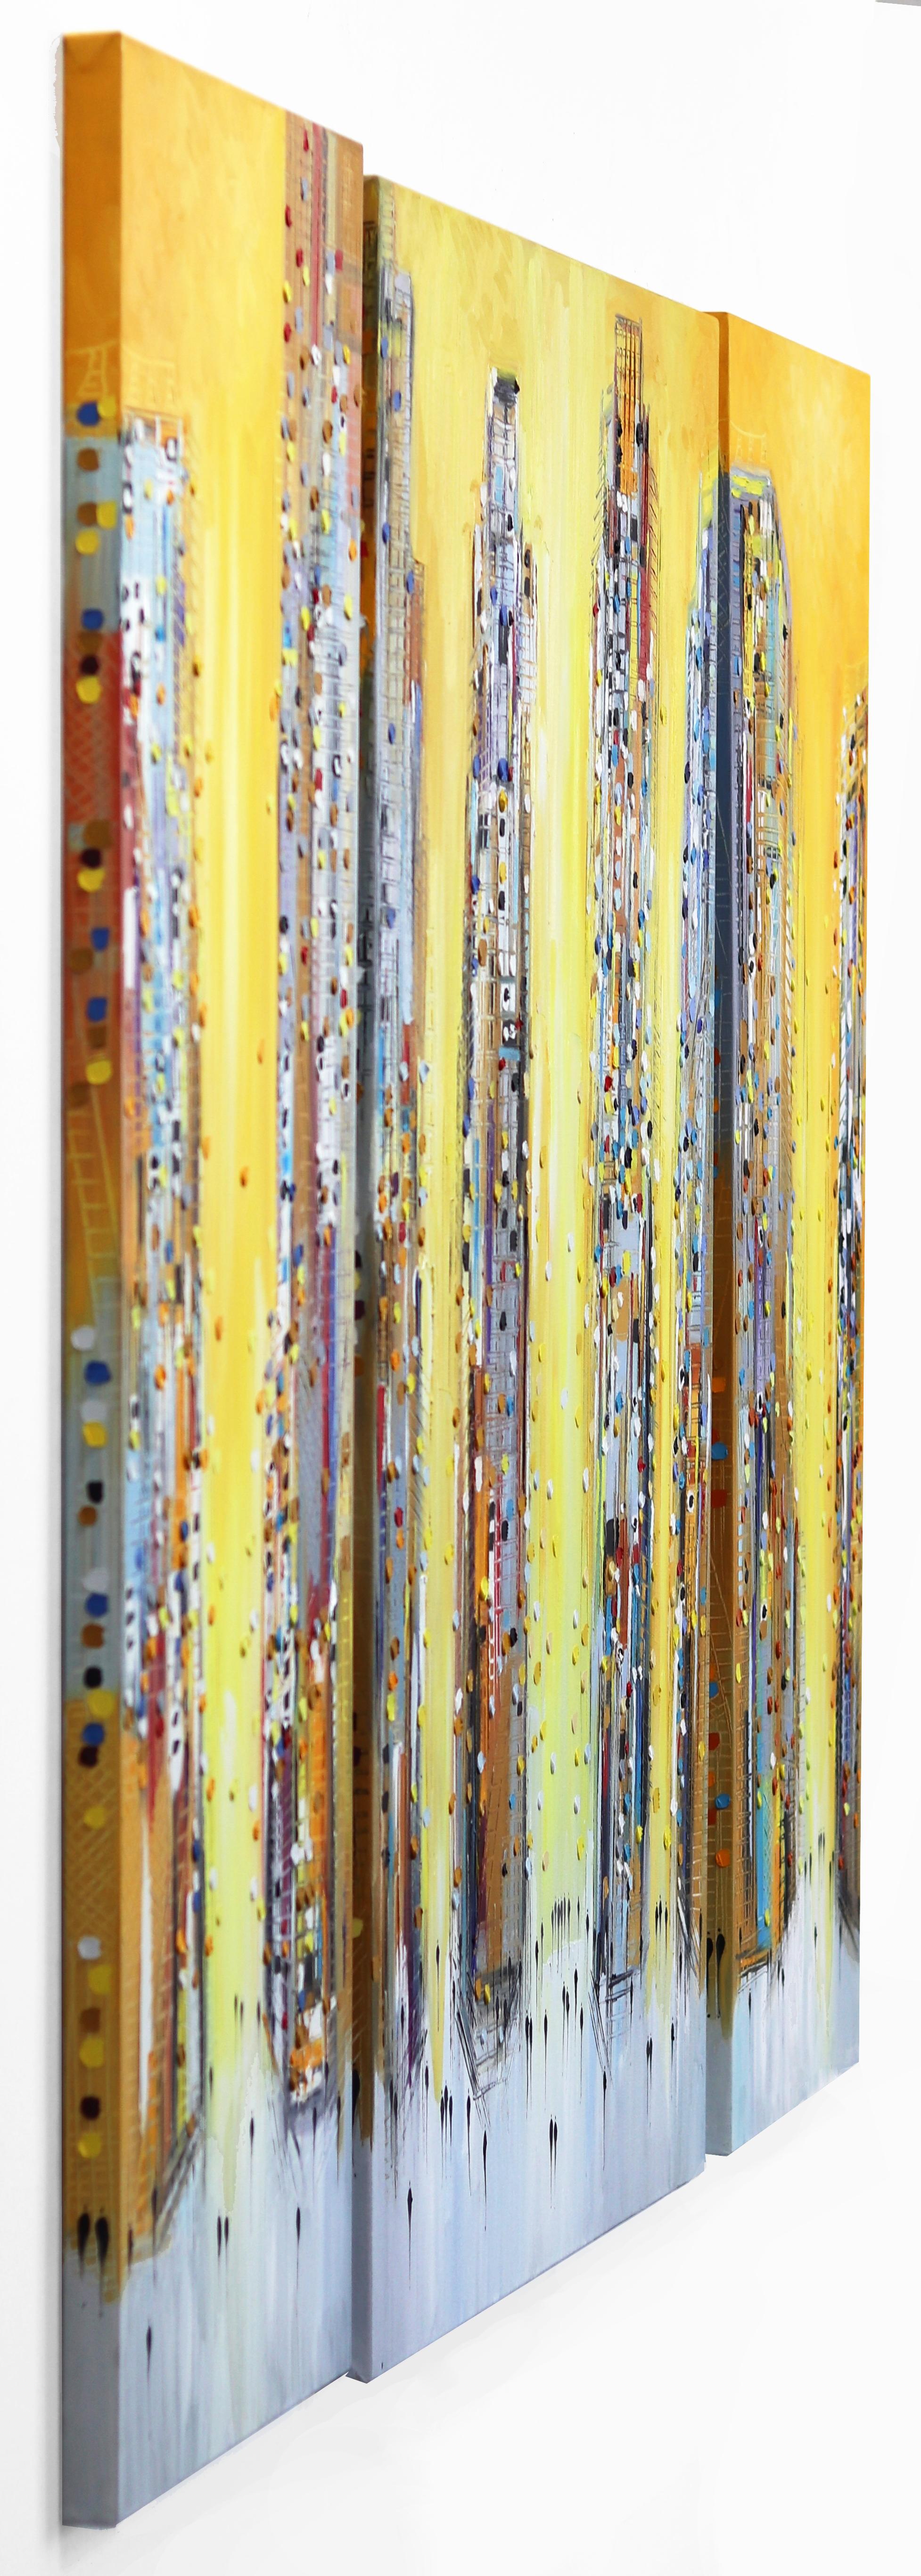 A Sun Kissed City (Triptych) - Large Yellow Textural Cityscape Oil Painting For Sale 1